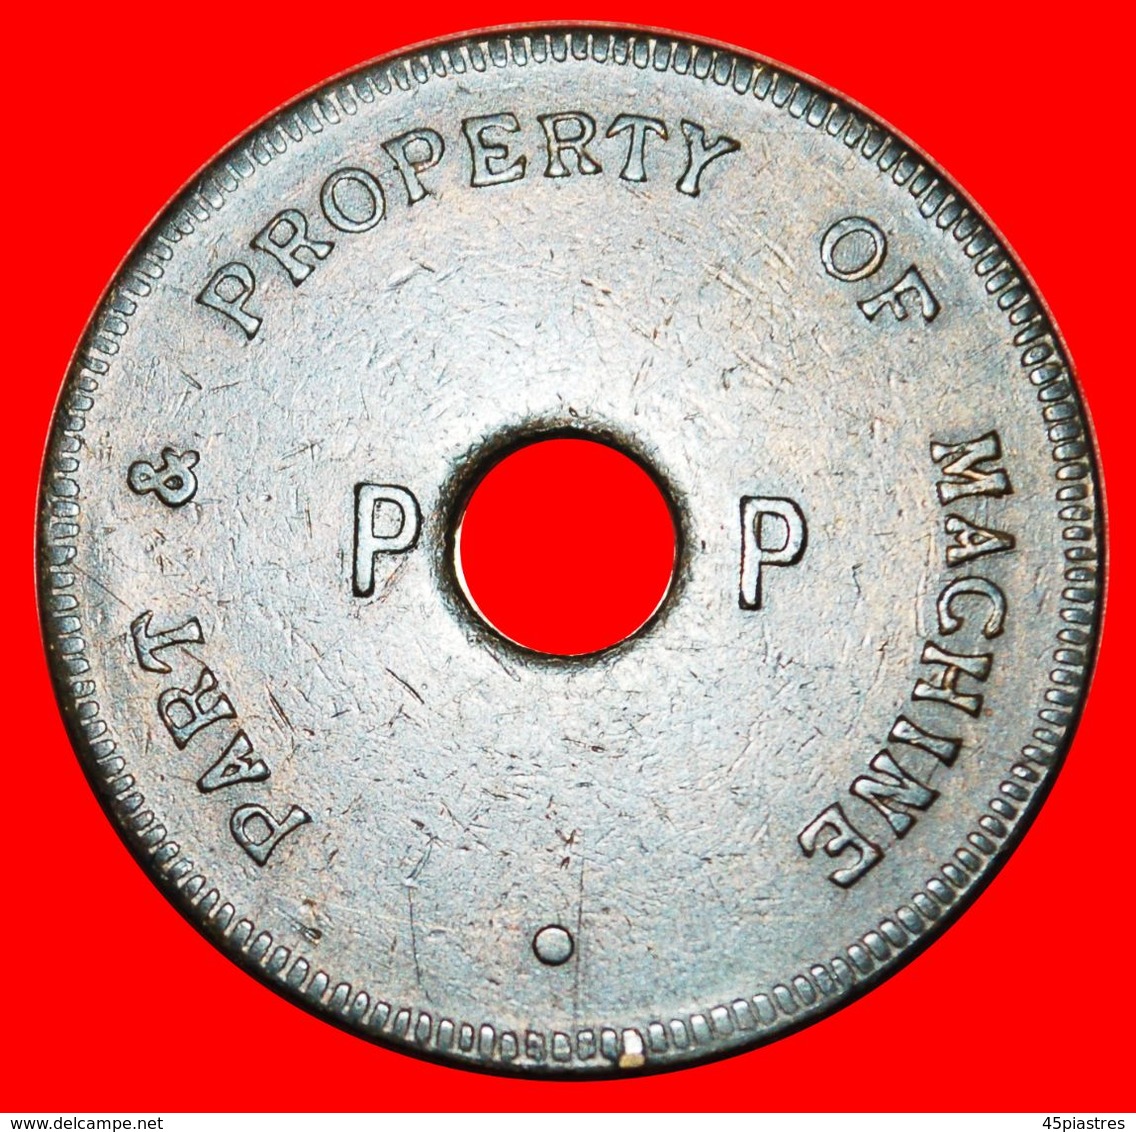 · P P: GREAT BRITAIN ★ PART & PROPERTY OF MACHINE! TO BE PUBLISHED! LOW START ★ NO RESERVE! - Professionals/Firms